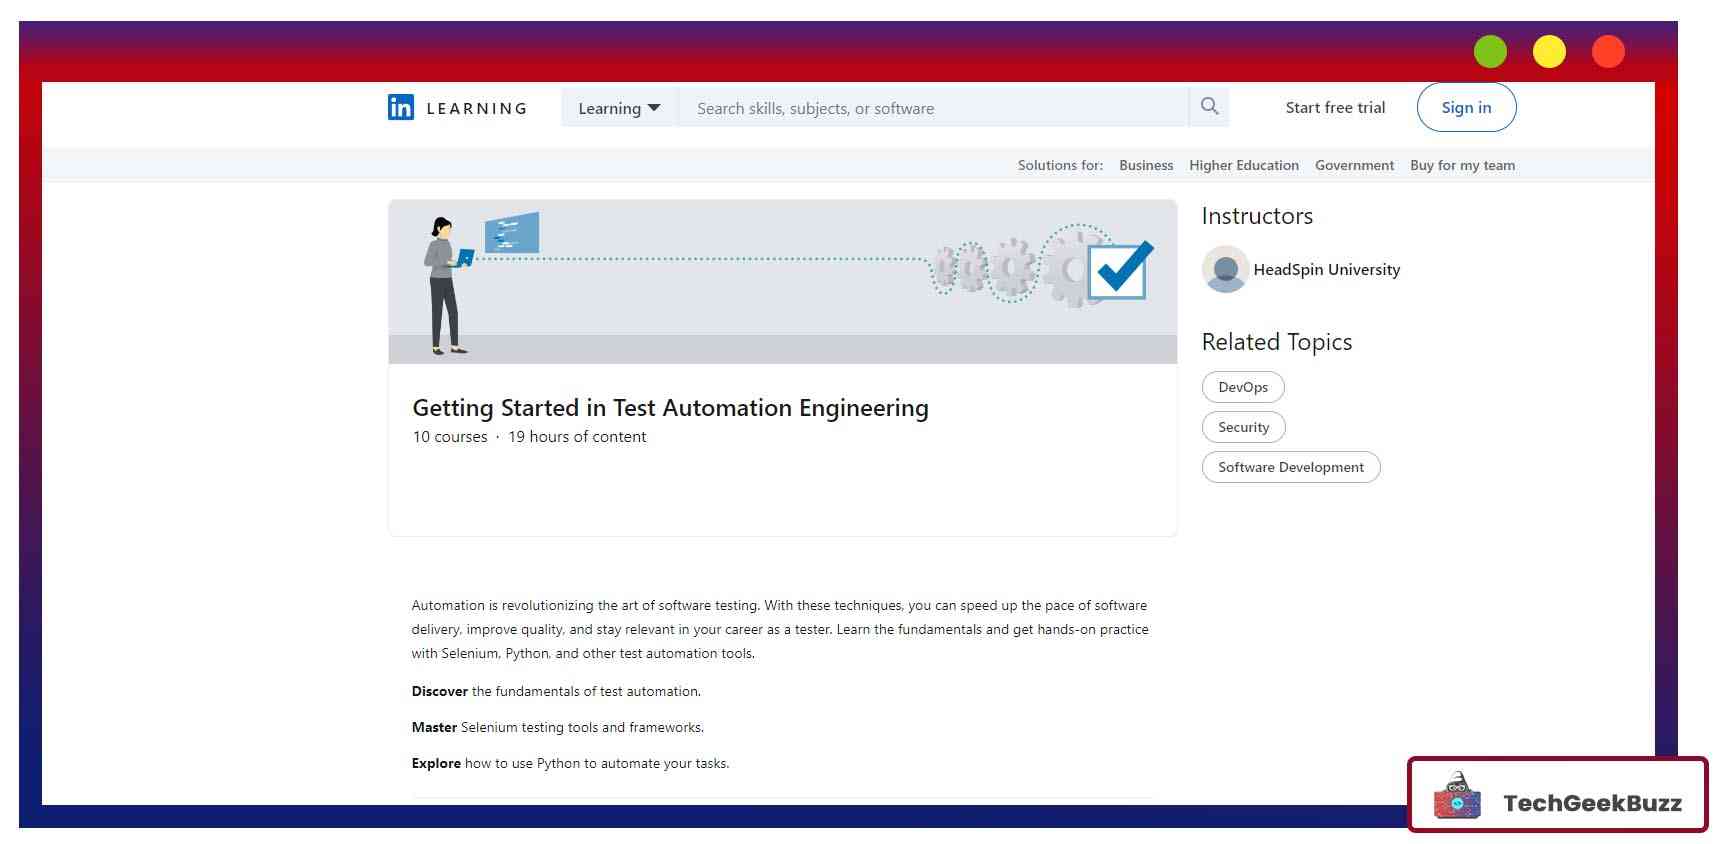 Become a Test Automation Engineer